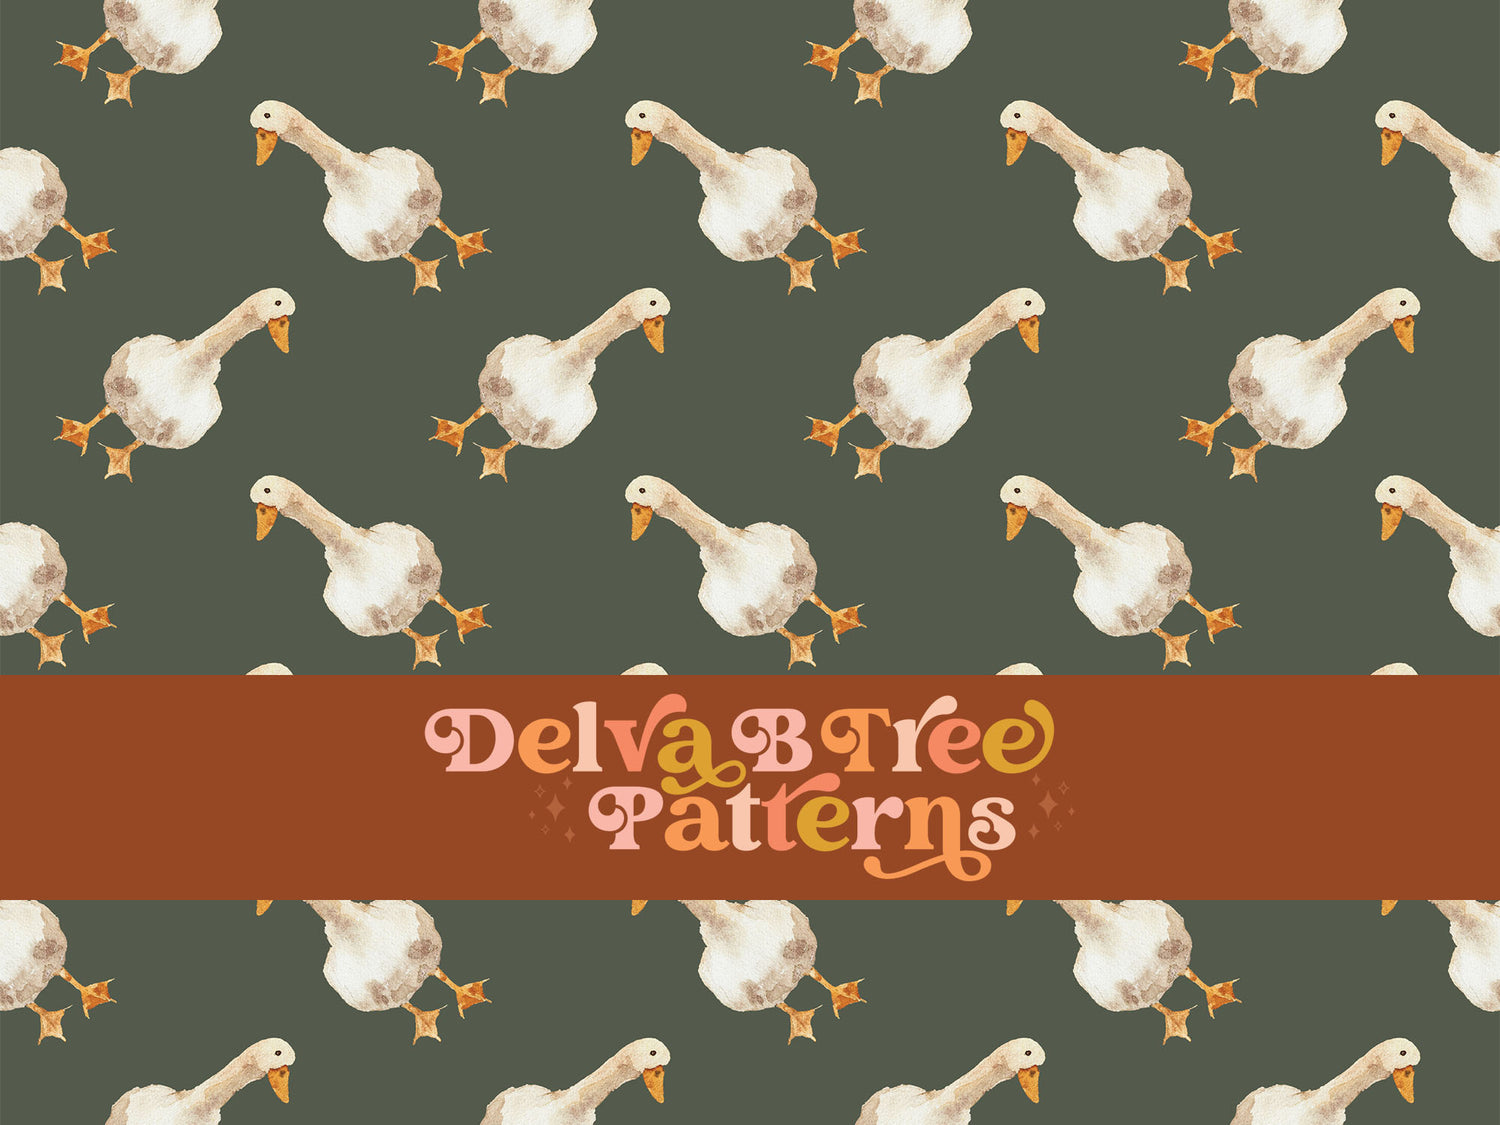 Watercolor geese on a thyme green background seamless file for fabric printing. Gender Neutral retro looking goose repeat pattern for textiles, polymailers, baby boy lovey blankets, nursery crib bedding, kids clothing, girls hair accessories, home decor accents, pet products.